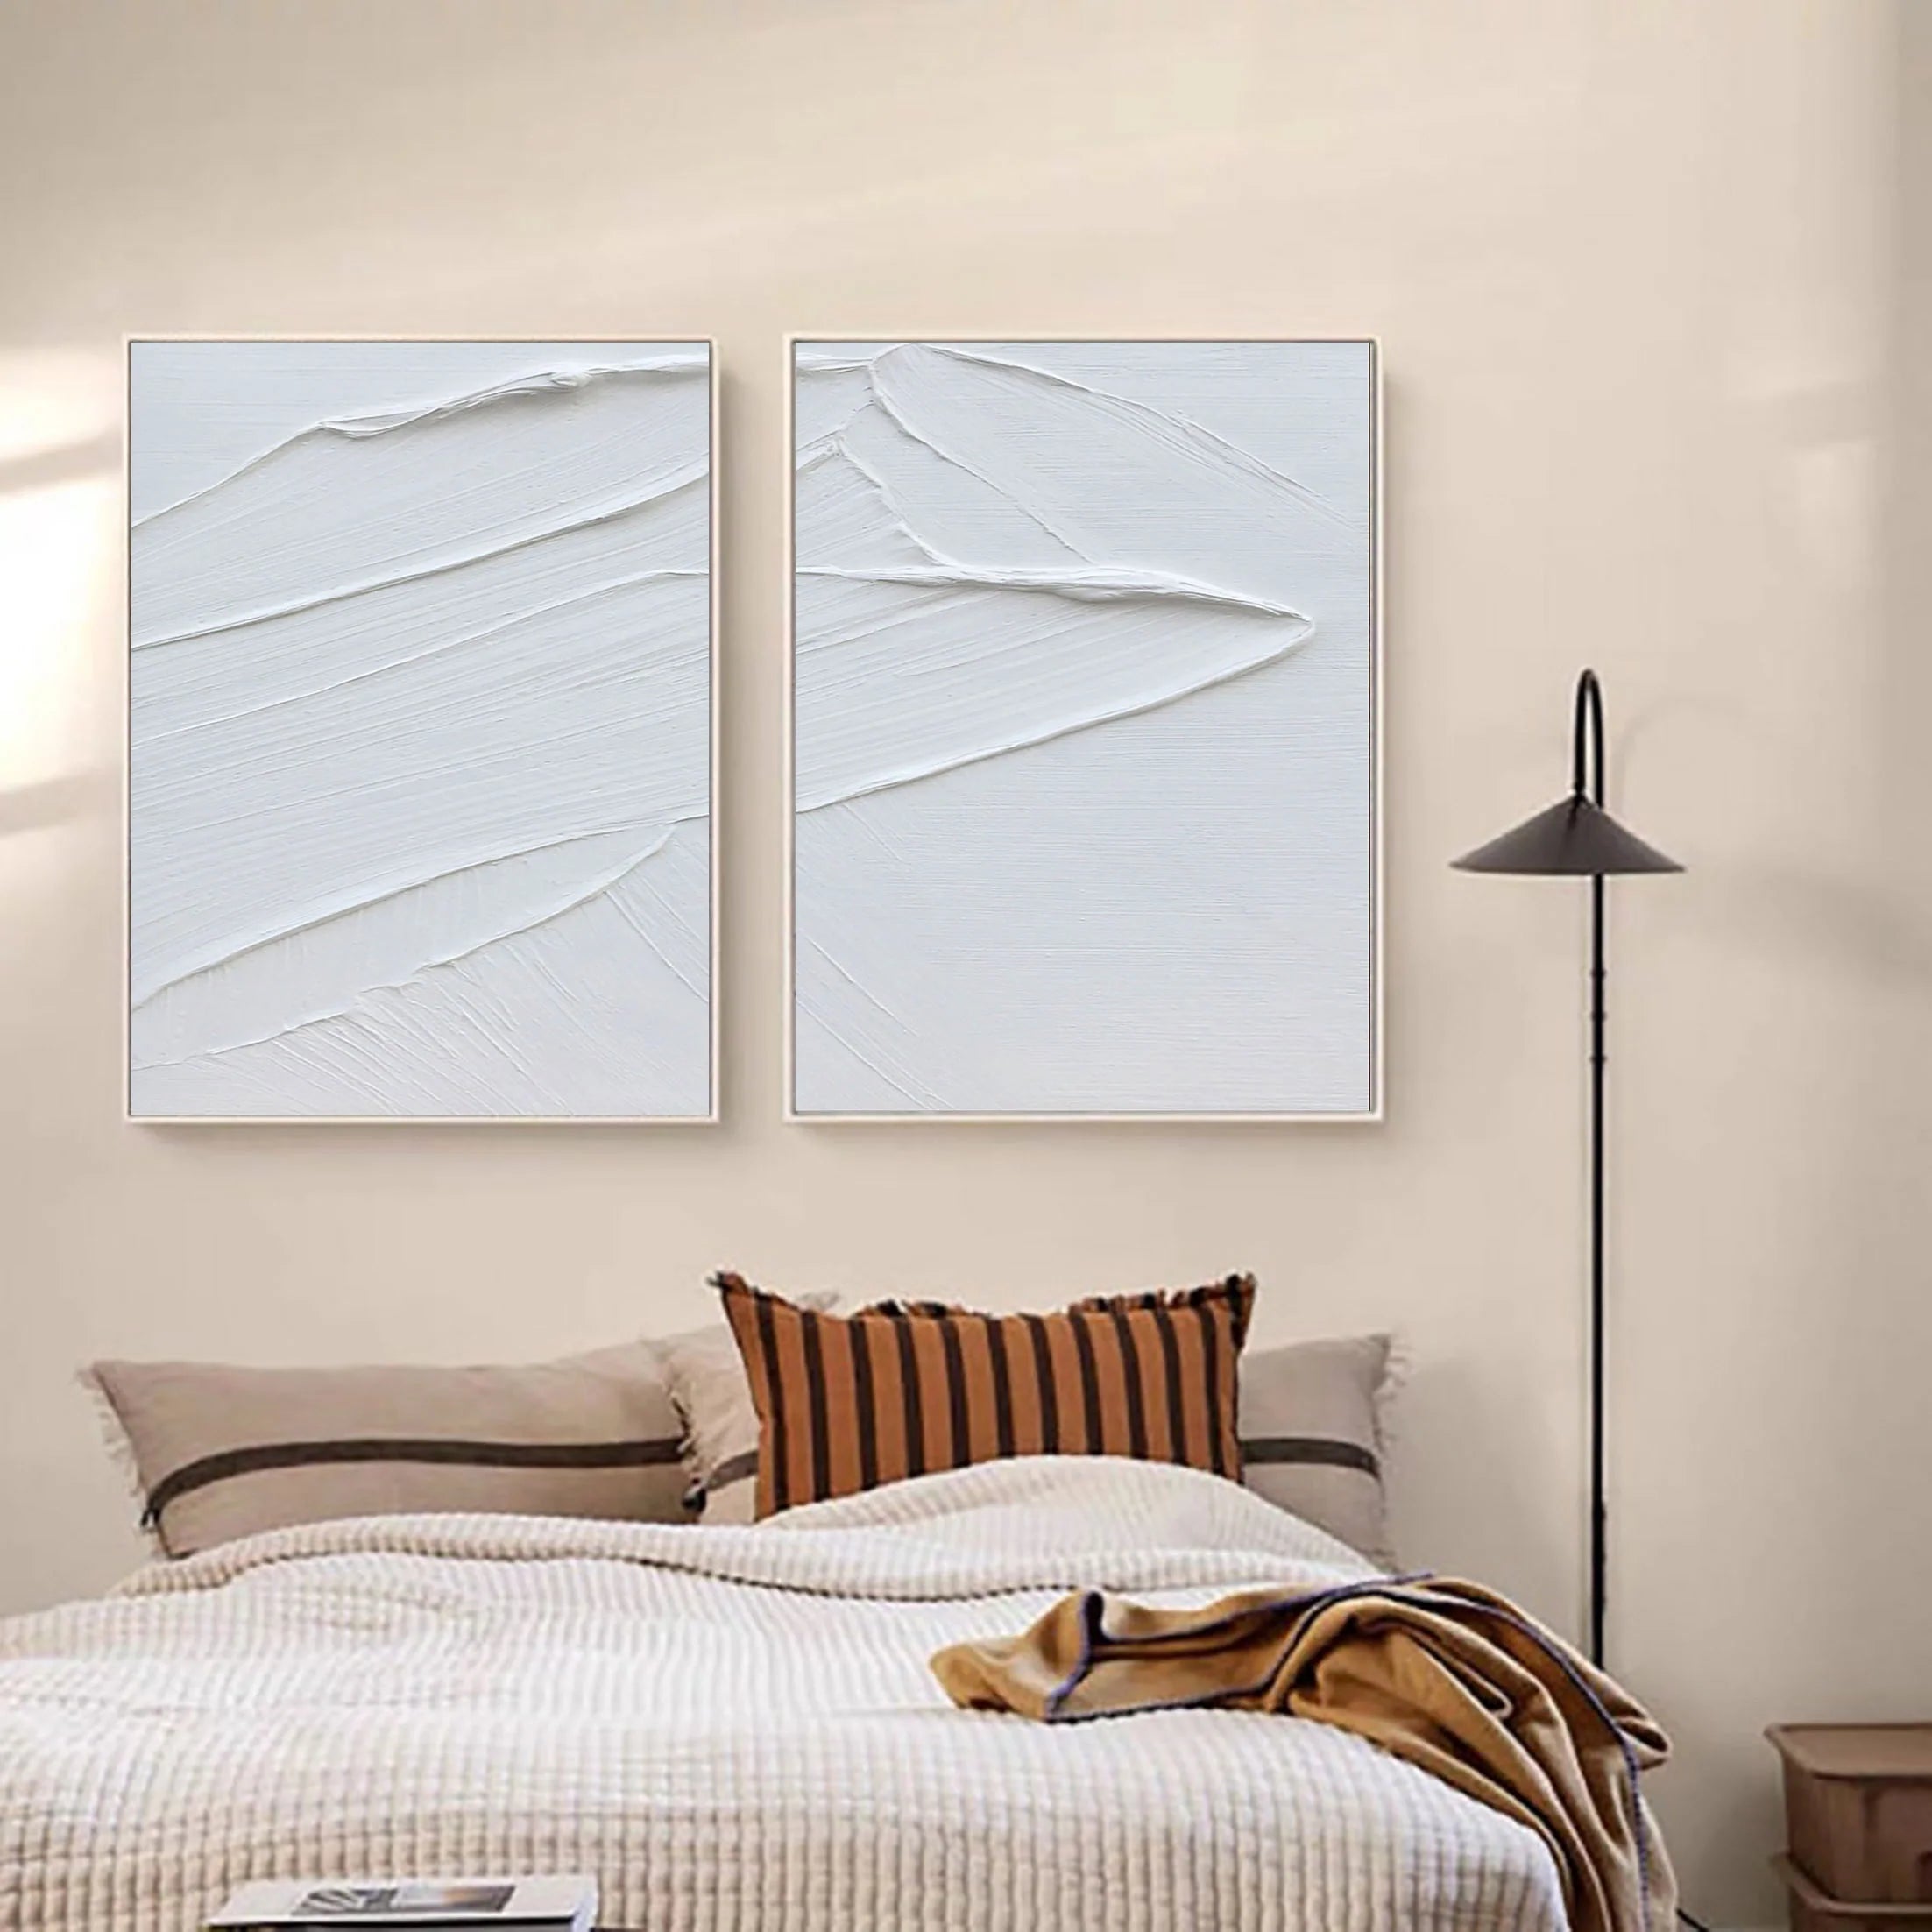 Set of 2 Plaster Art Minimalistic Painting Wall Decor for Room